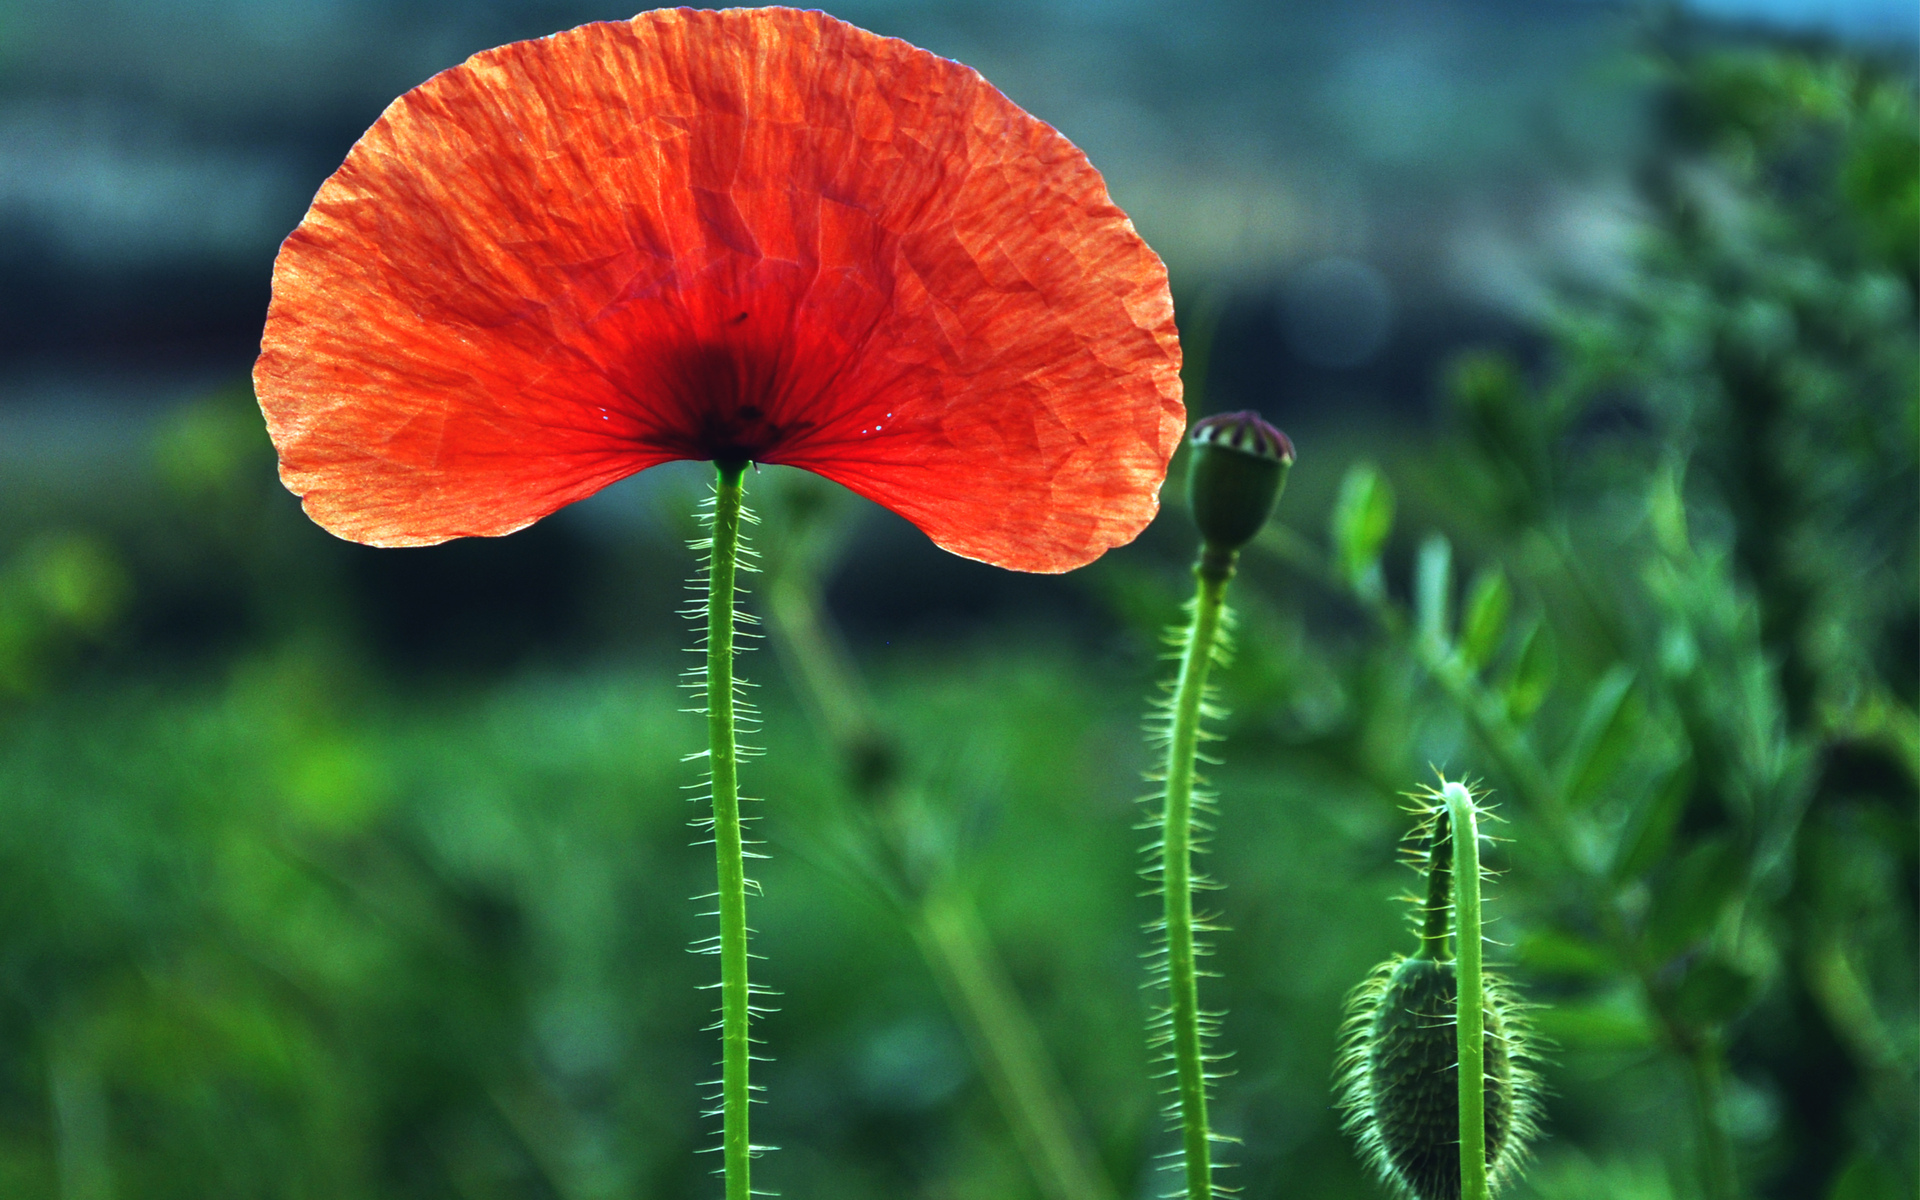 nature, Flowers, Poppy, Poppies, Petals, Red, Green, Plants, Bulbs, Macro, Closeup, Fields, Landscapes, Color, Contrast Wallpaper